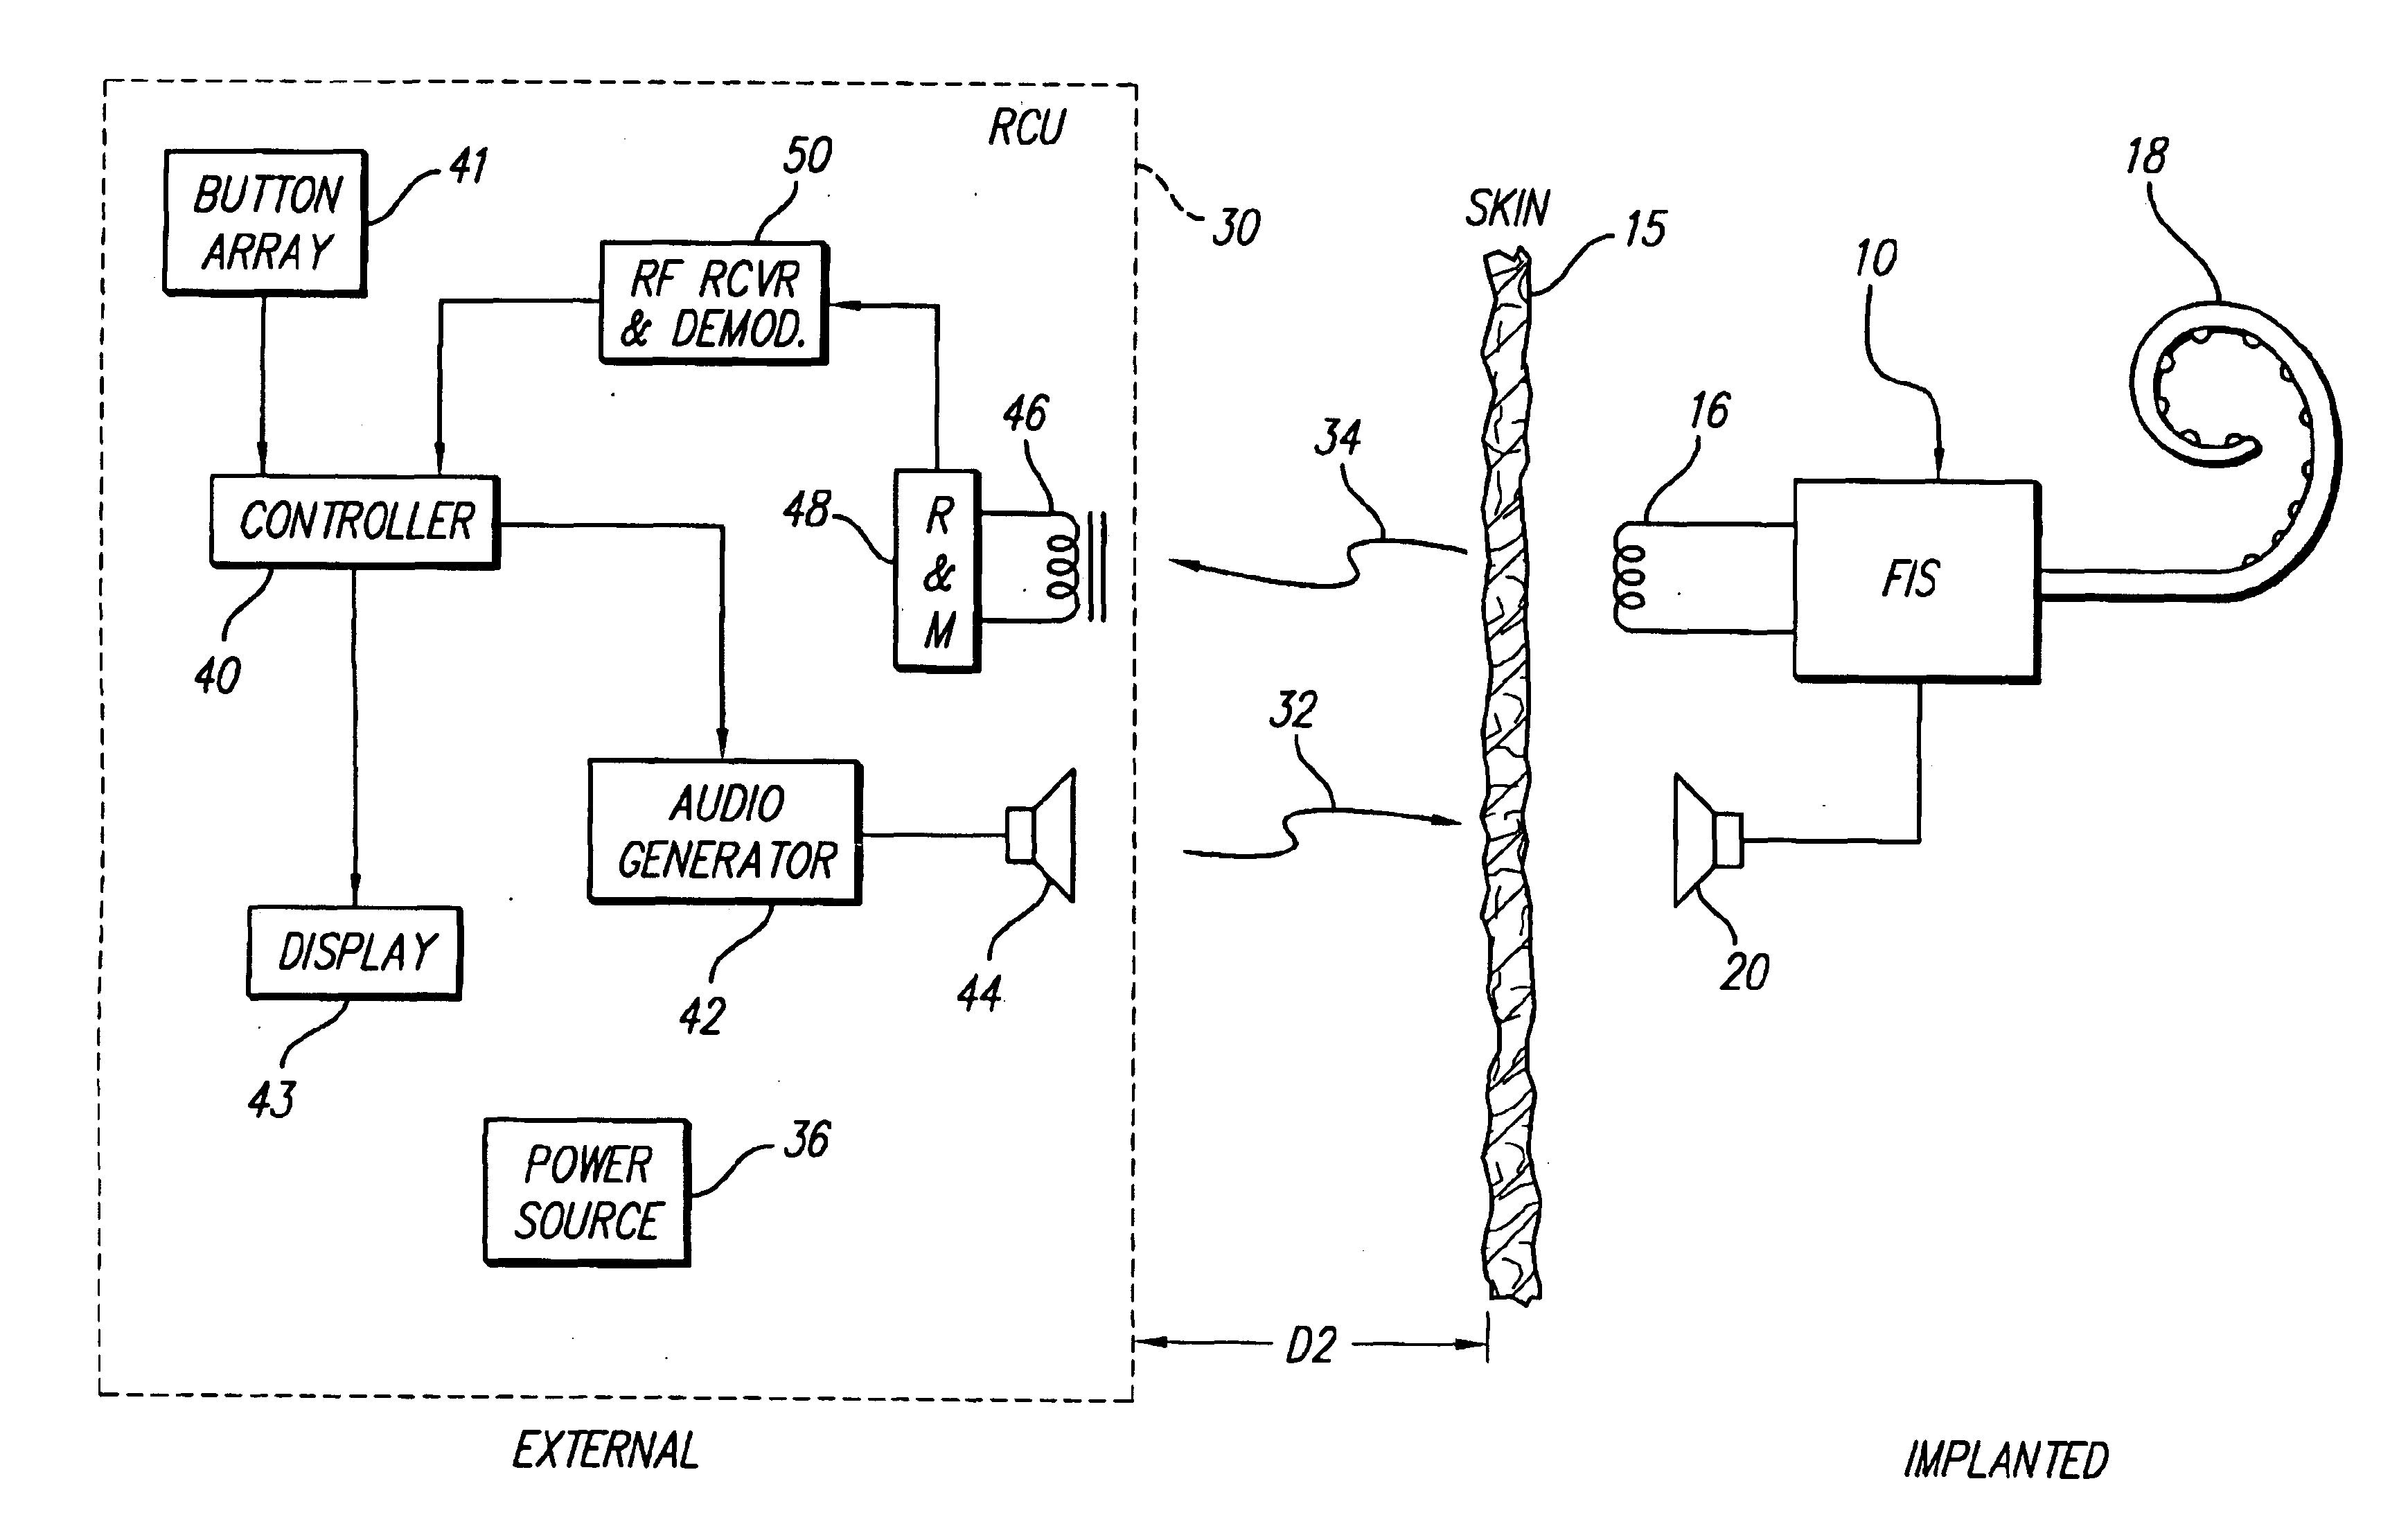 Implantable neural stimulator system including remote control unit for use therewith